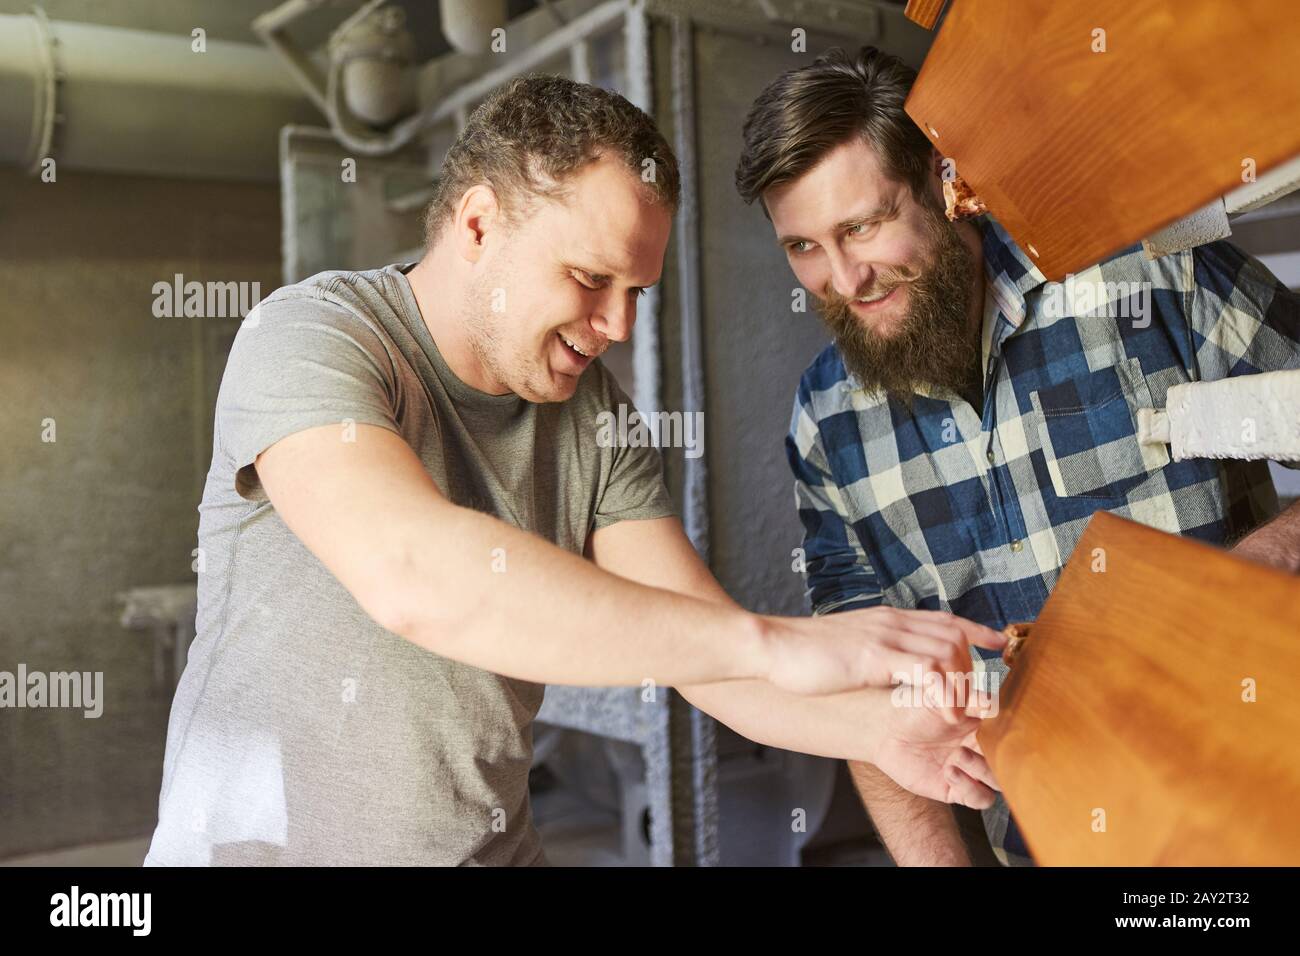 Carpenter instructor and apprentice look at a wood board in the carpentry shop Stock Photo